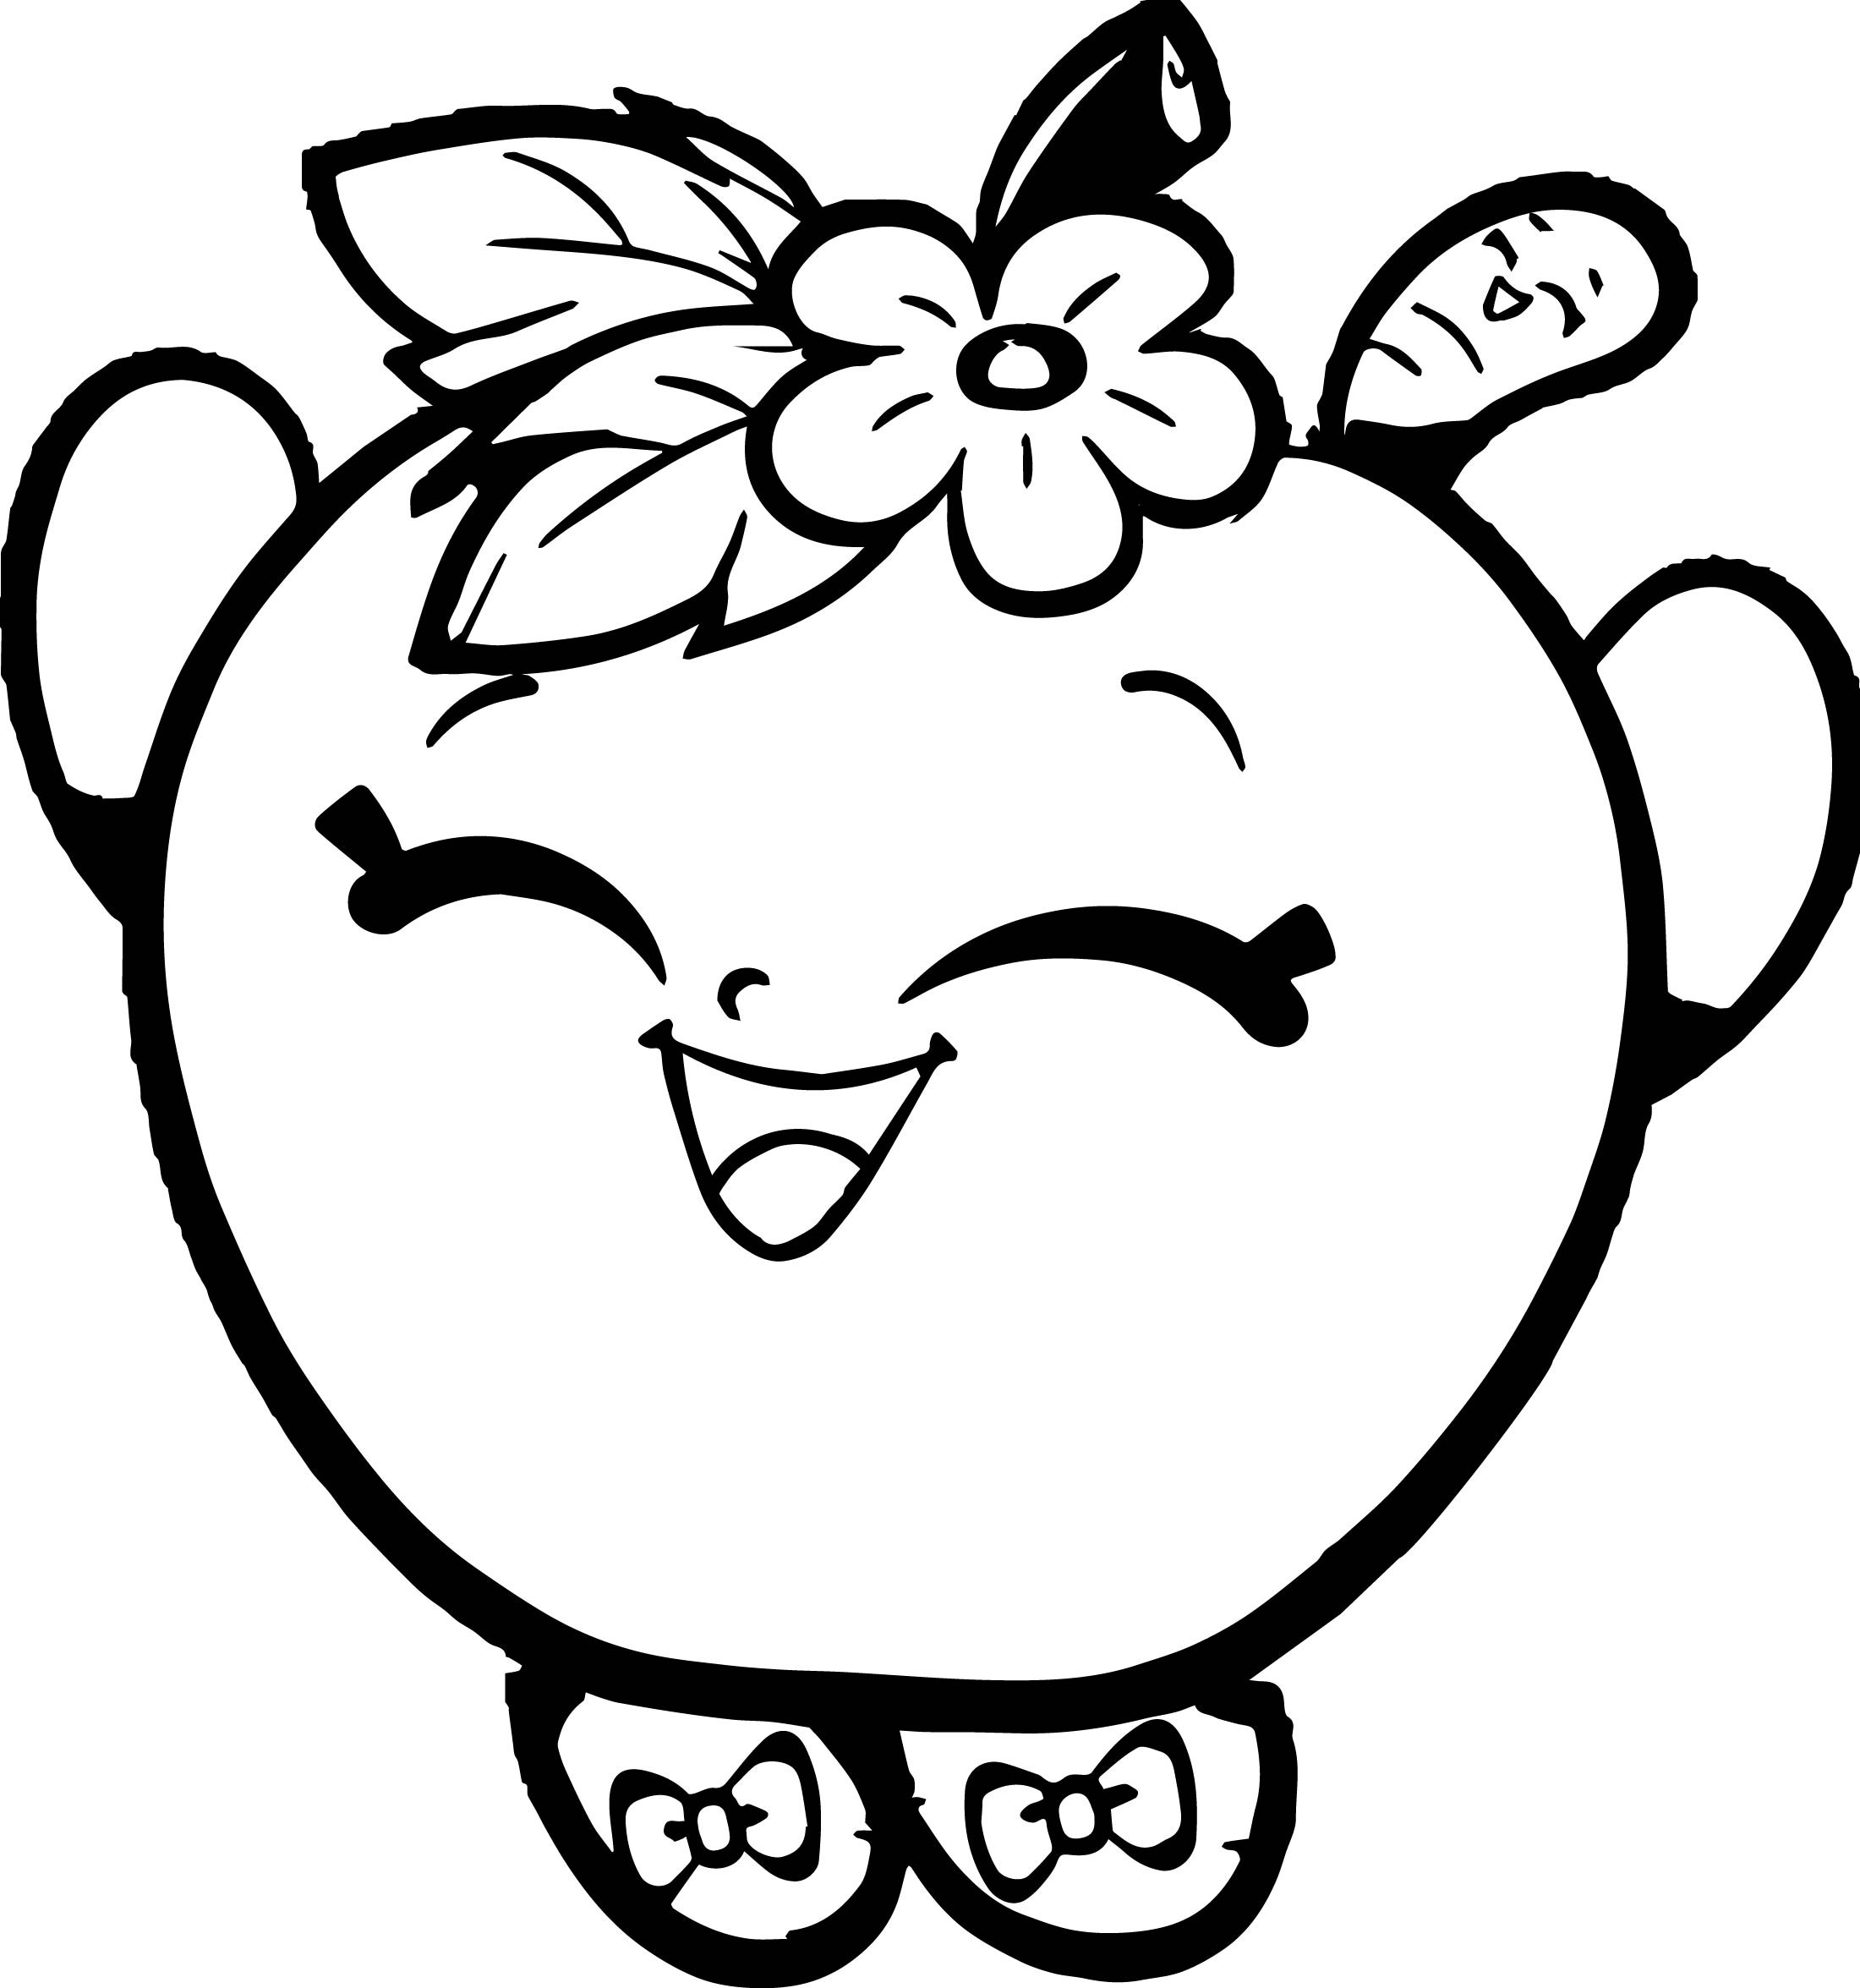 Coloring Pages For Girls Shopkins Apple
 Shopkins Apple Coloring Page